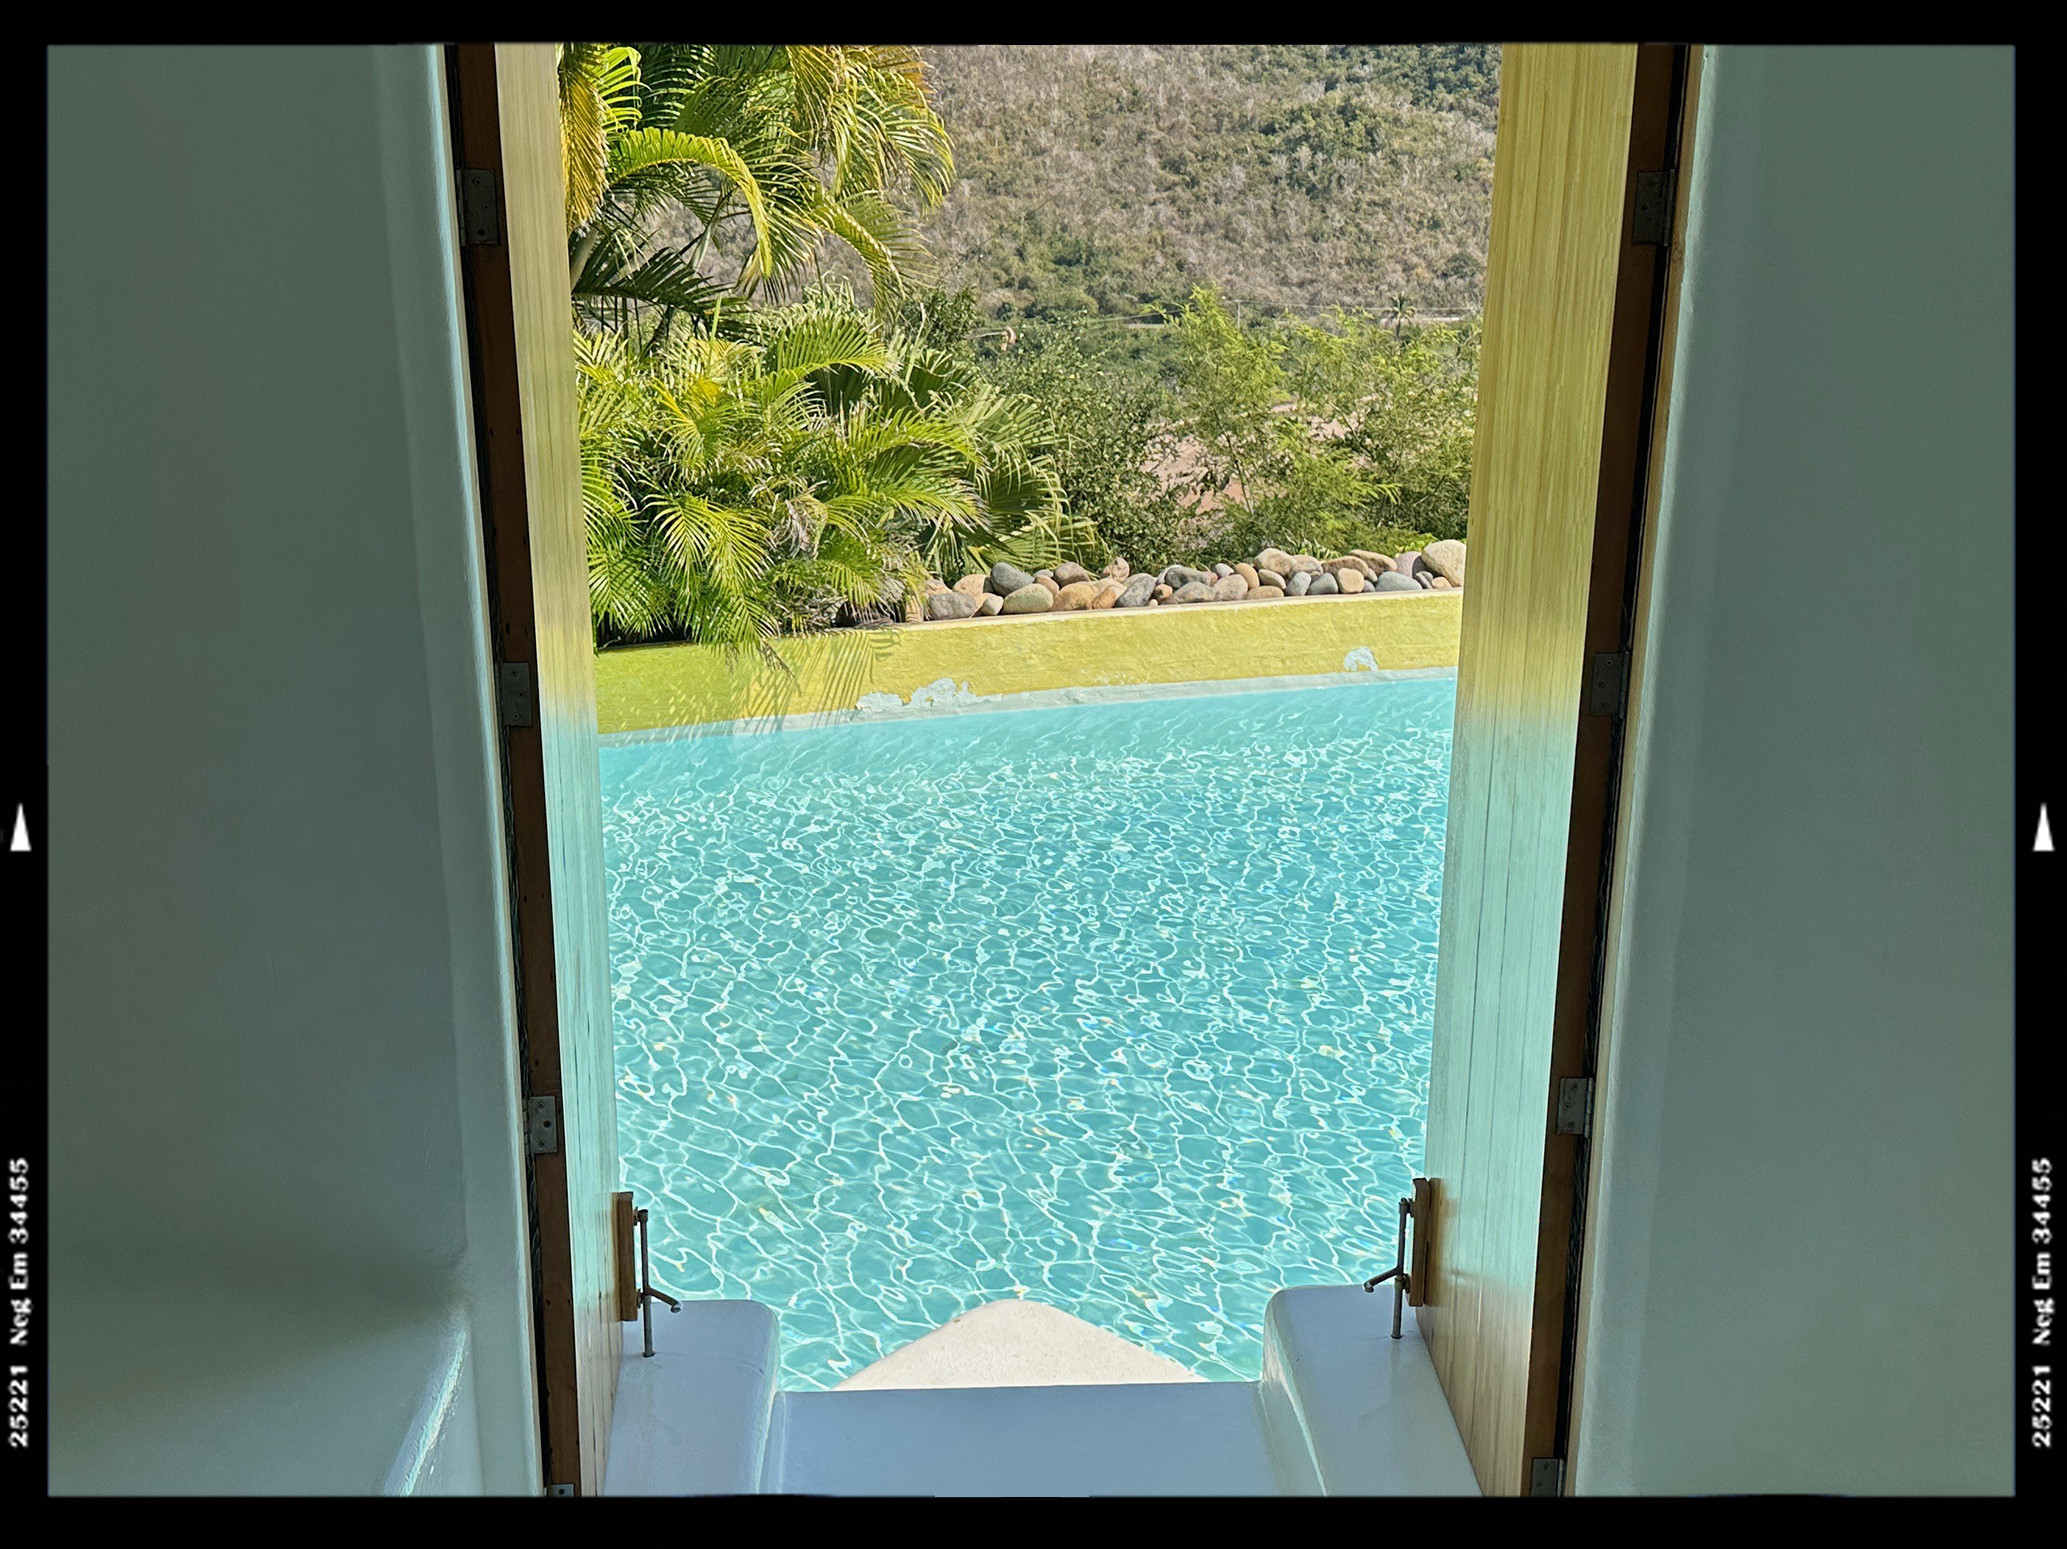 Doorway opening out into swimming pool